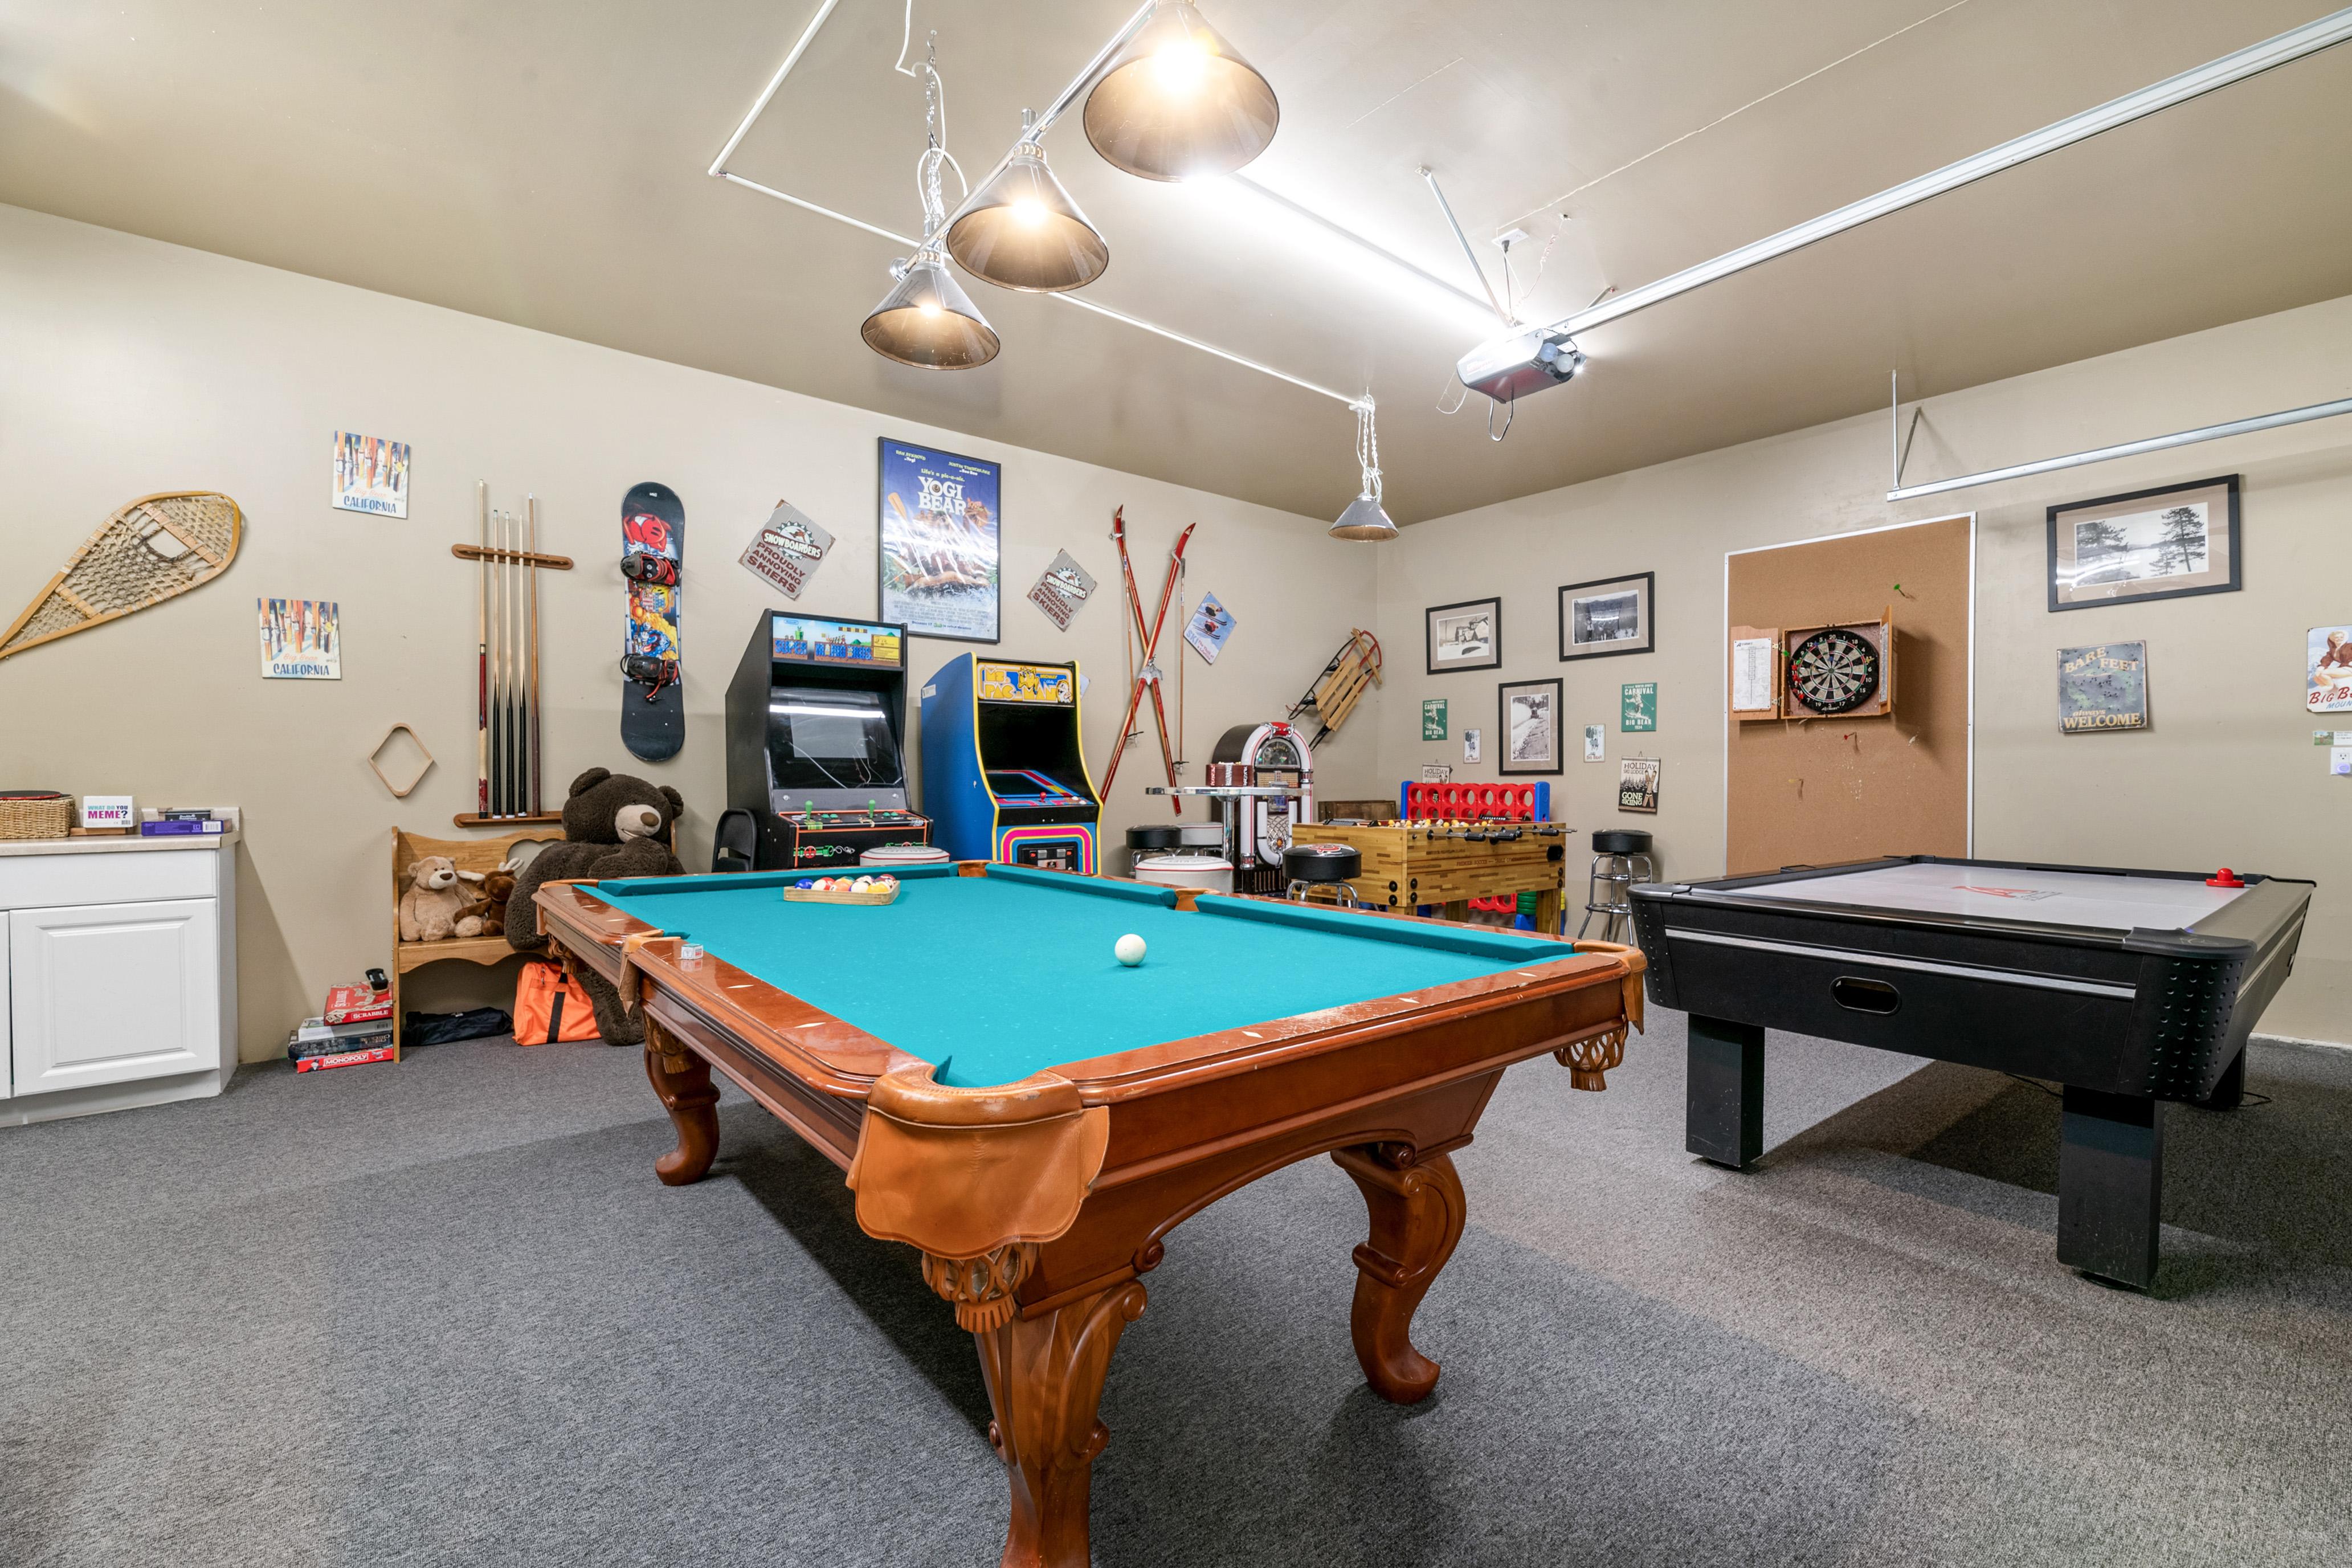 AMAZING Game room with POOL, AIR HOCKEY, and plenty of arcade games!